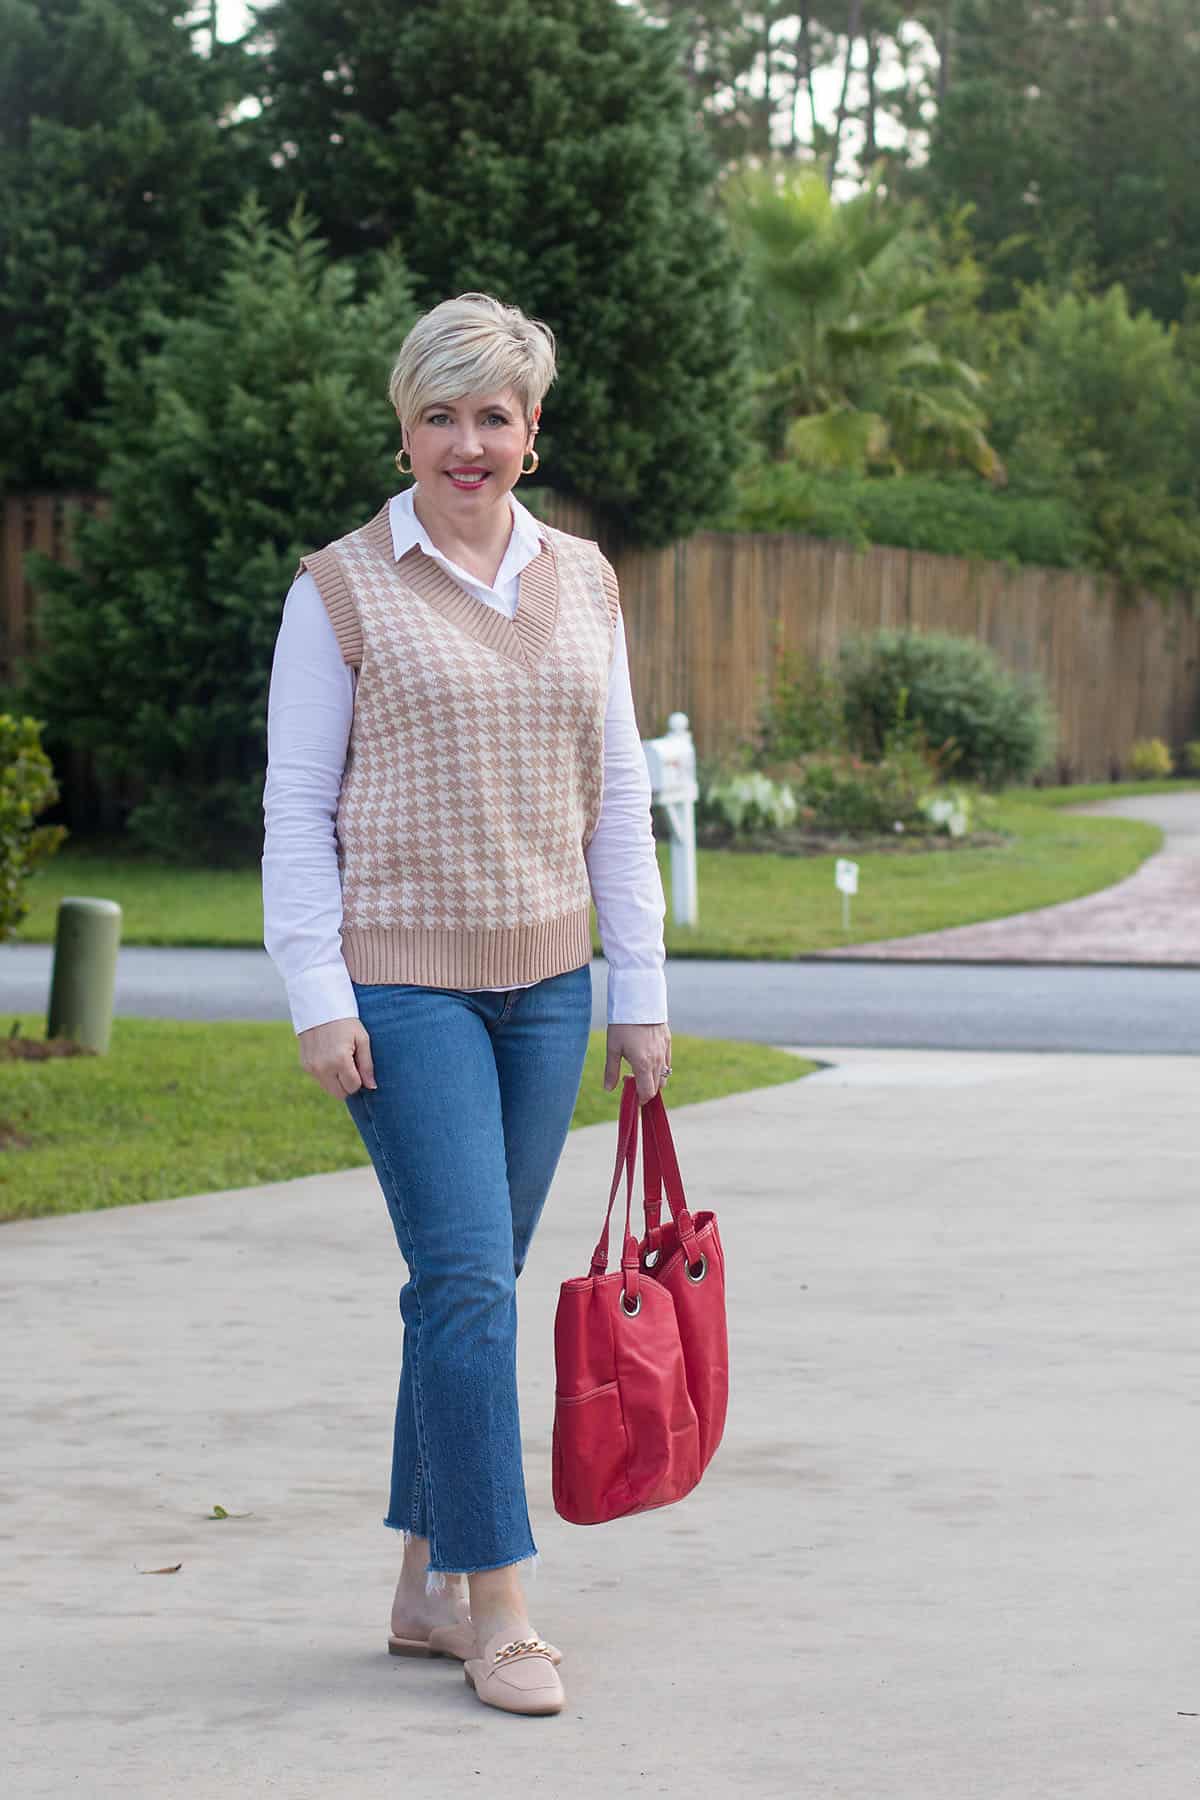 Classy Clothes For Over 50